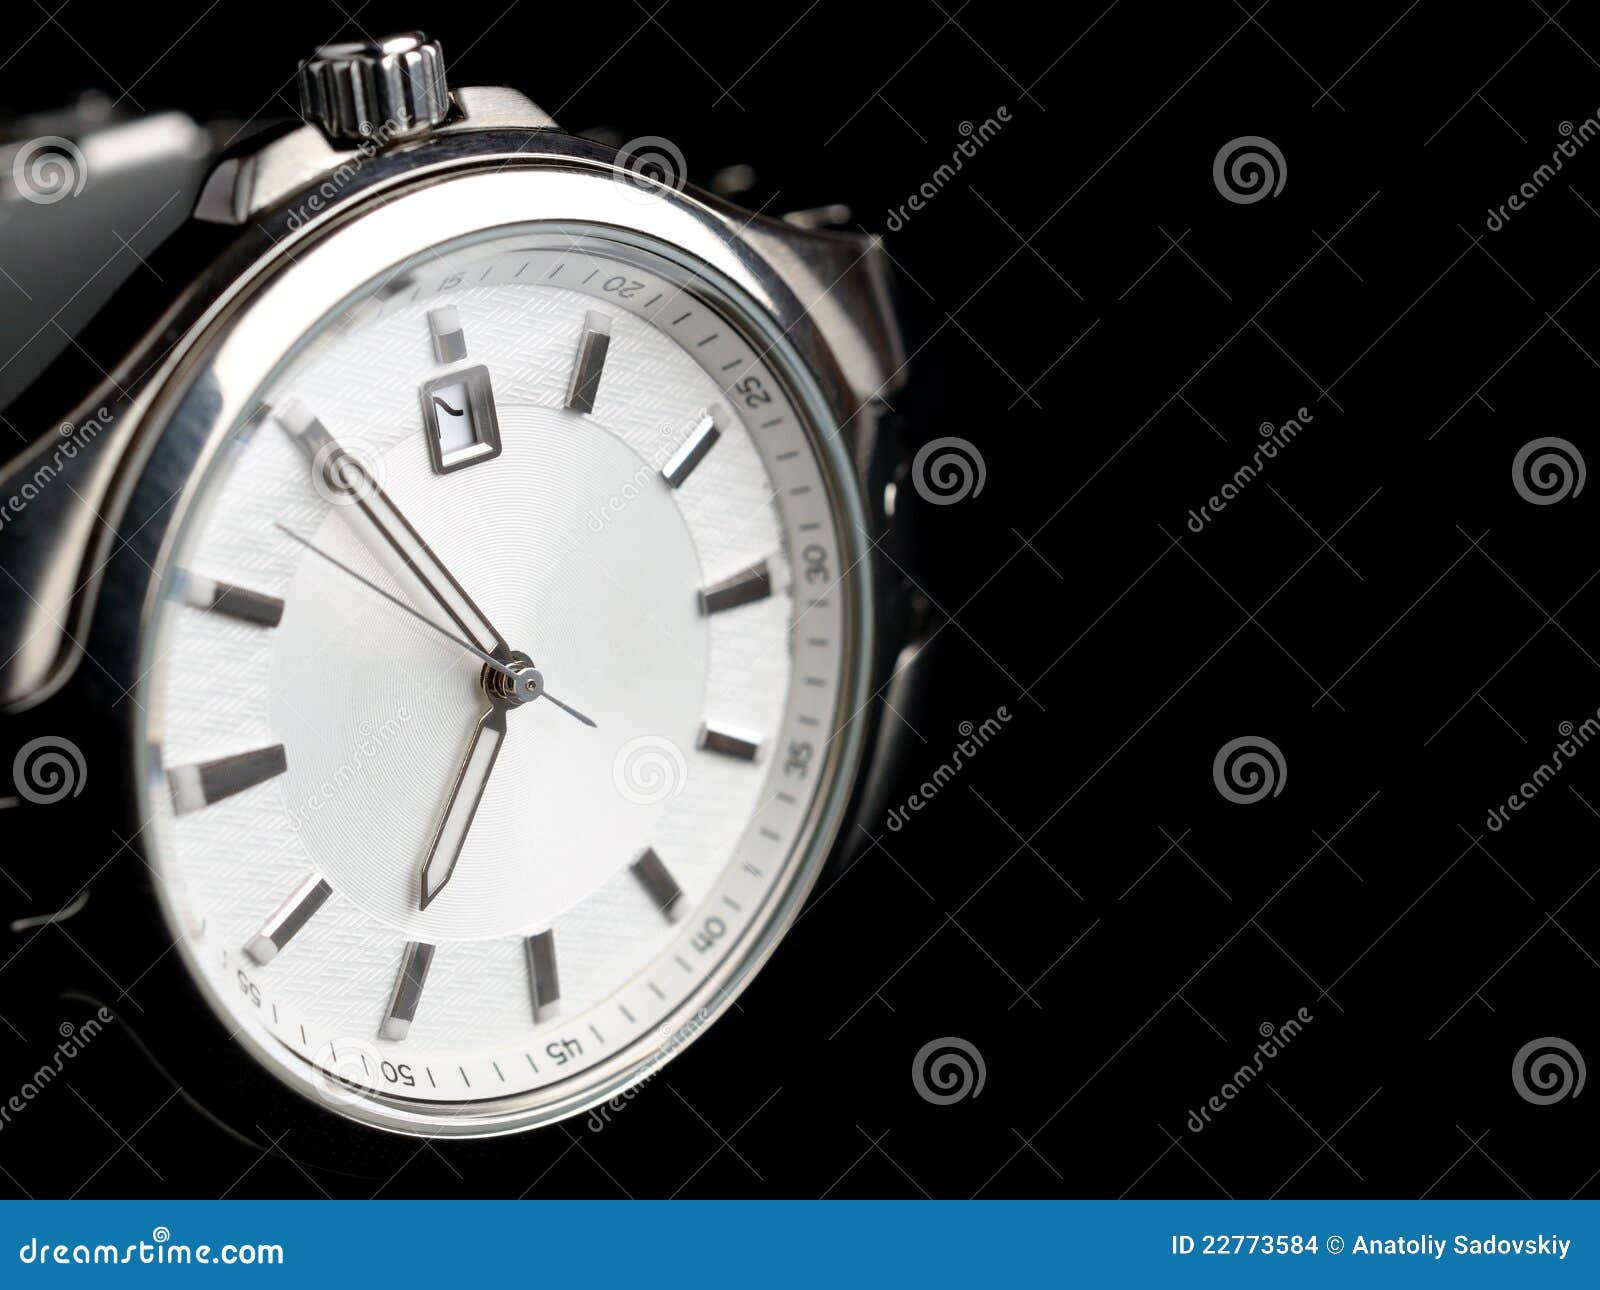 Silver wrist watch stock photo. Image of metal, accessory - 22773584